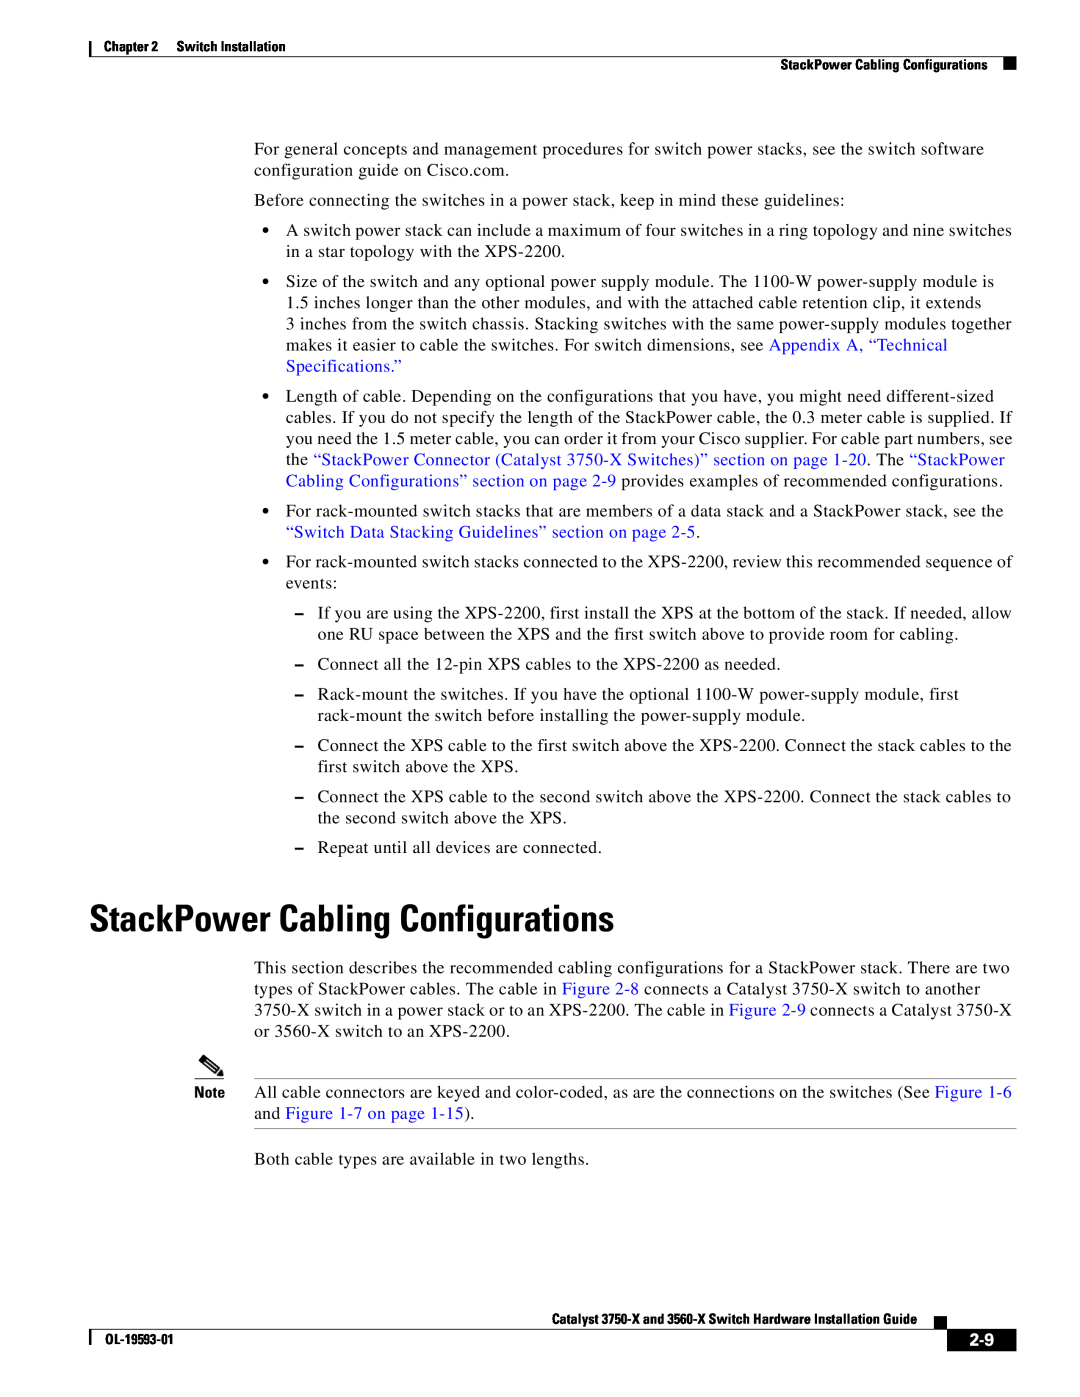 Cisco Systems 3560-X, 3750-X manual StackPower Cabling Configurations 